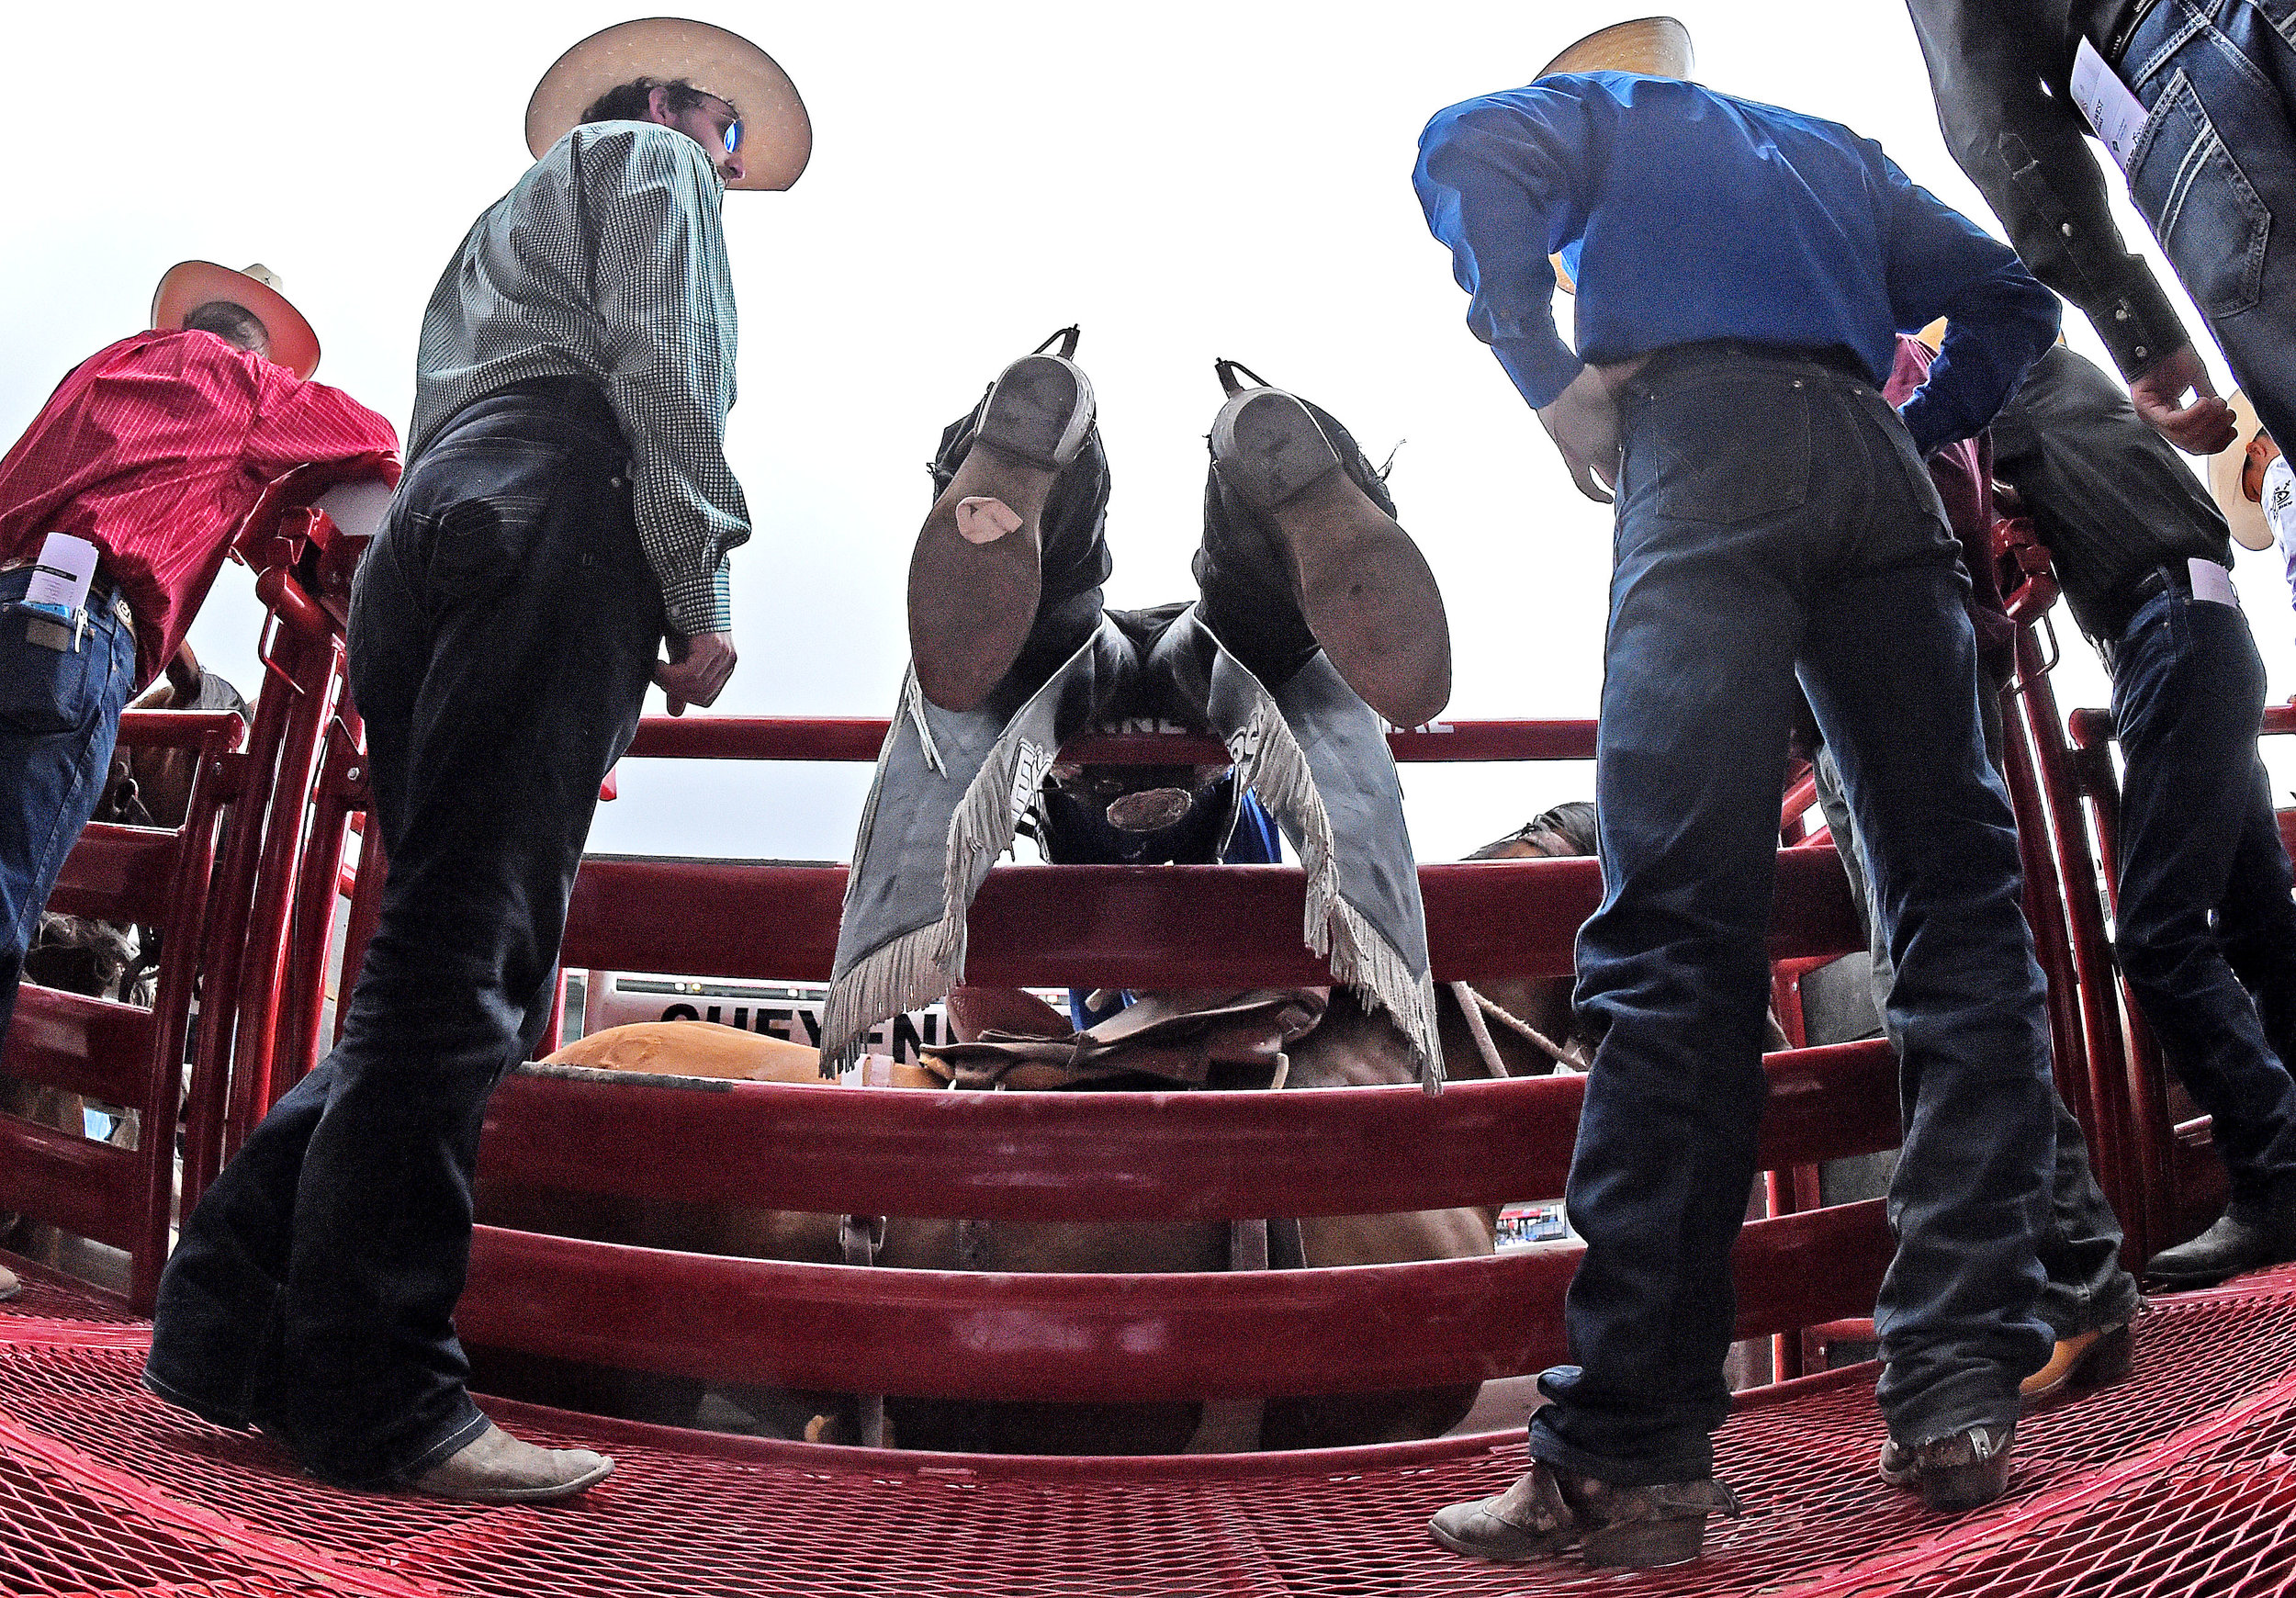  Defending saddle bronc world champion Ryder Wright from Midford, Utah, leans over the bucking chutes as he prepares to ride Chill Wills during the 6th performance at the 122nd Cheyenne Frontier Days Rodeo at Frontier Park in Cheyenne, Wyoming Wednes